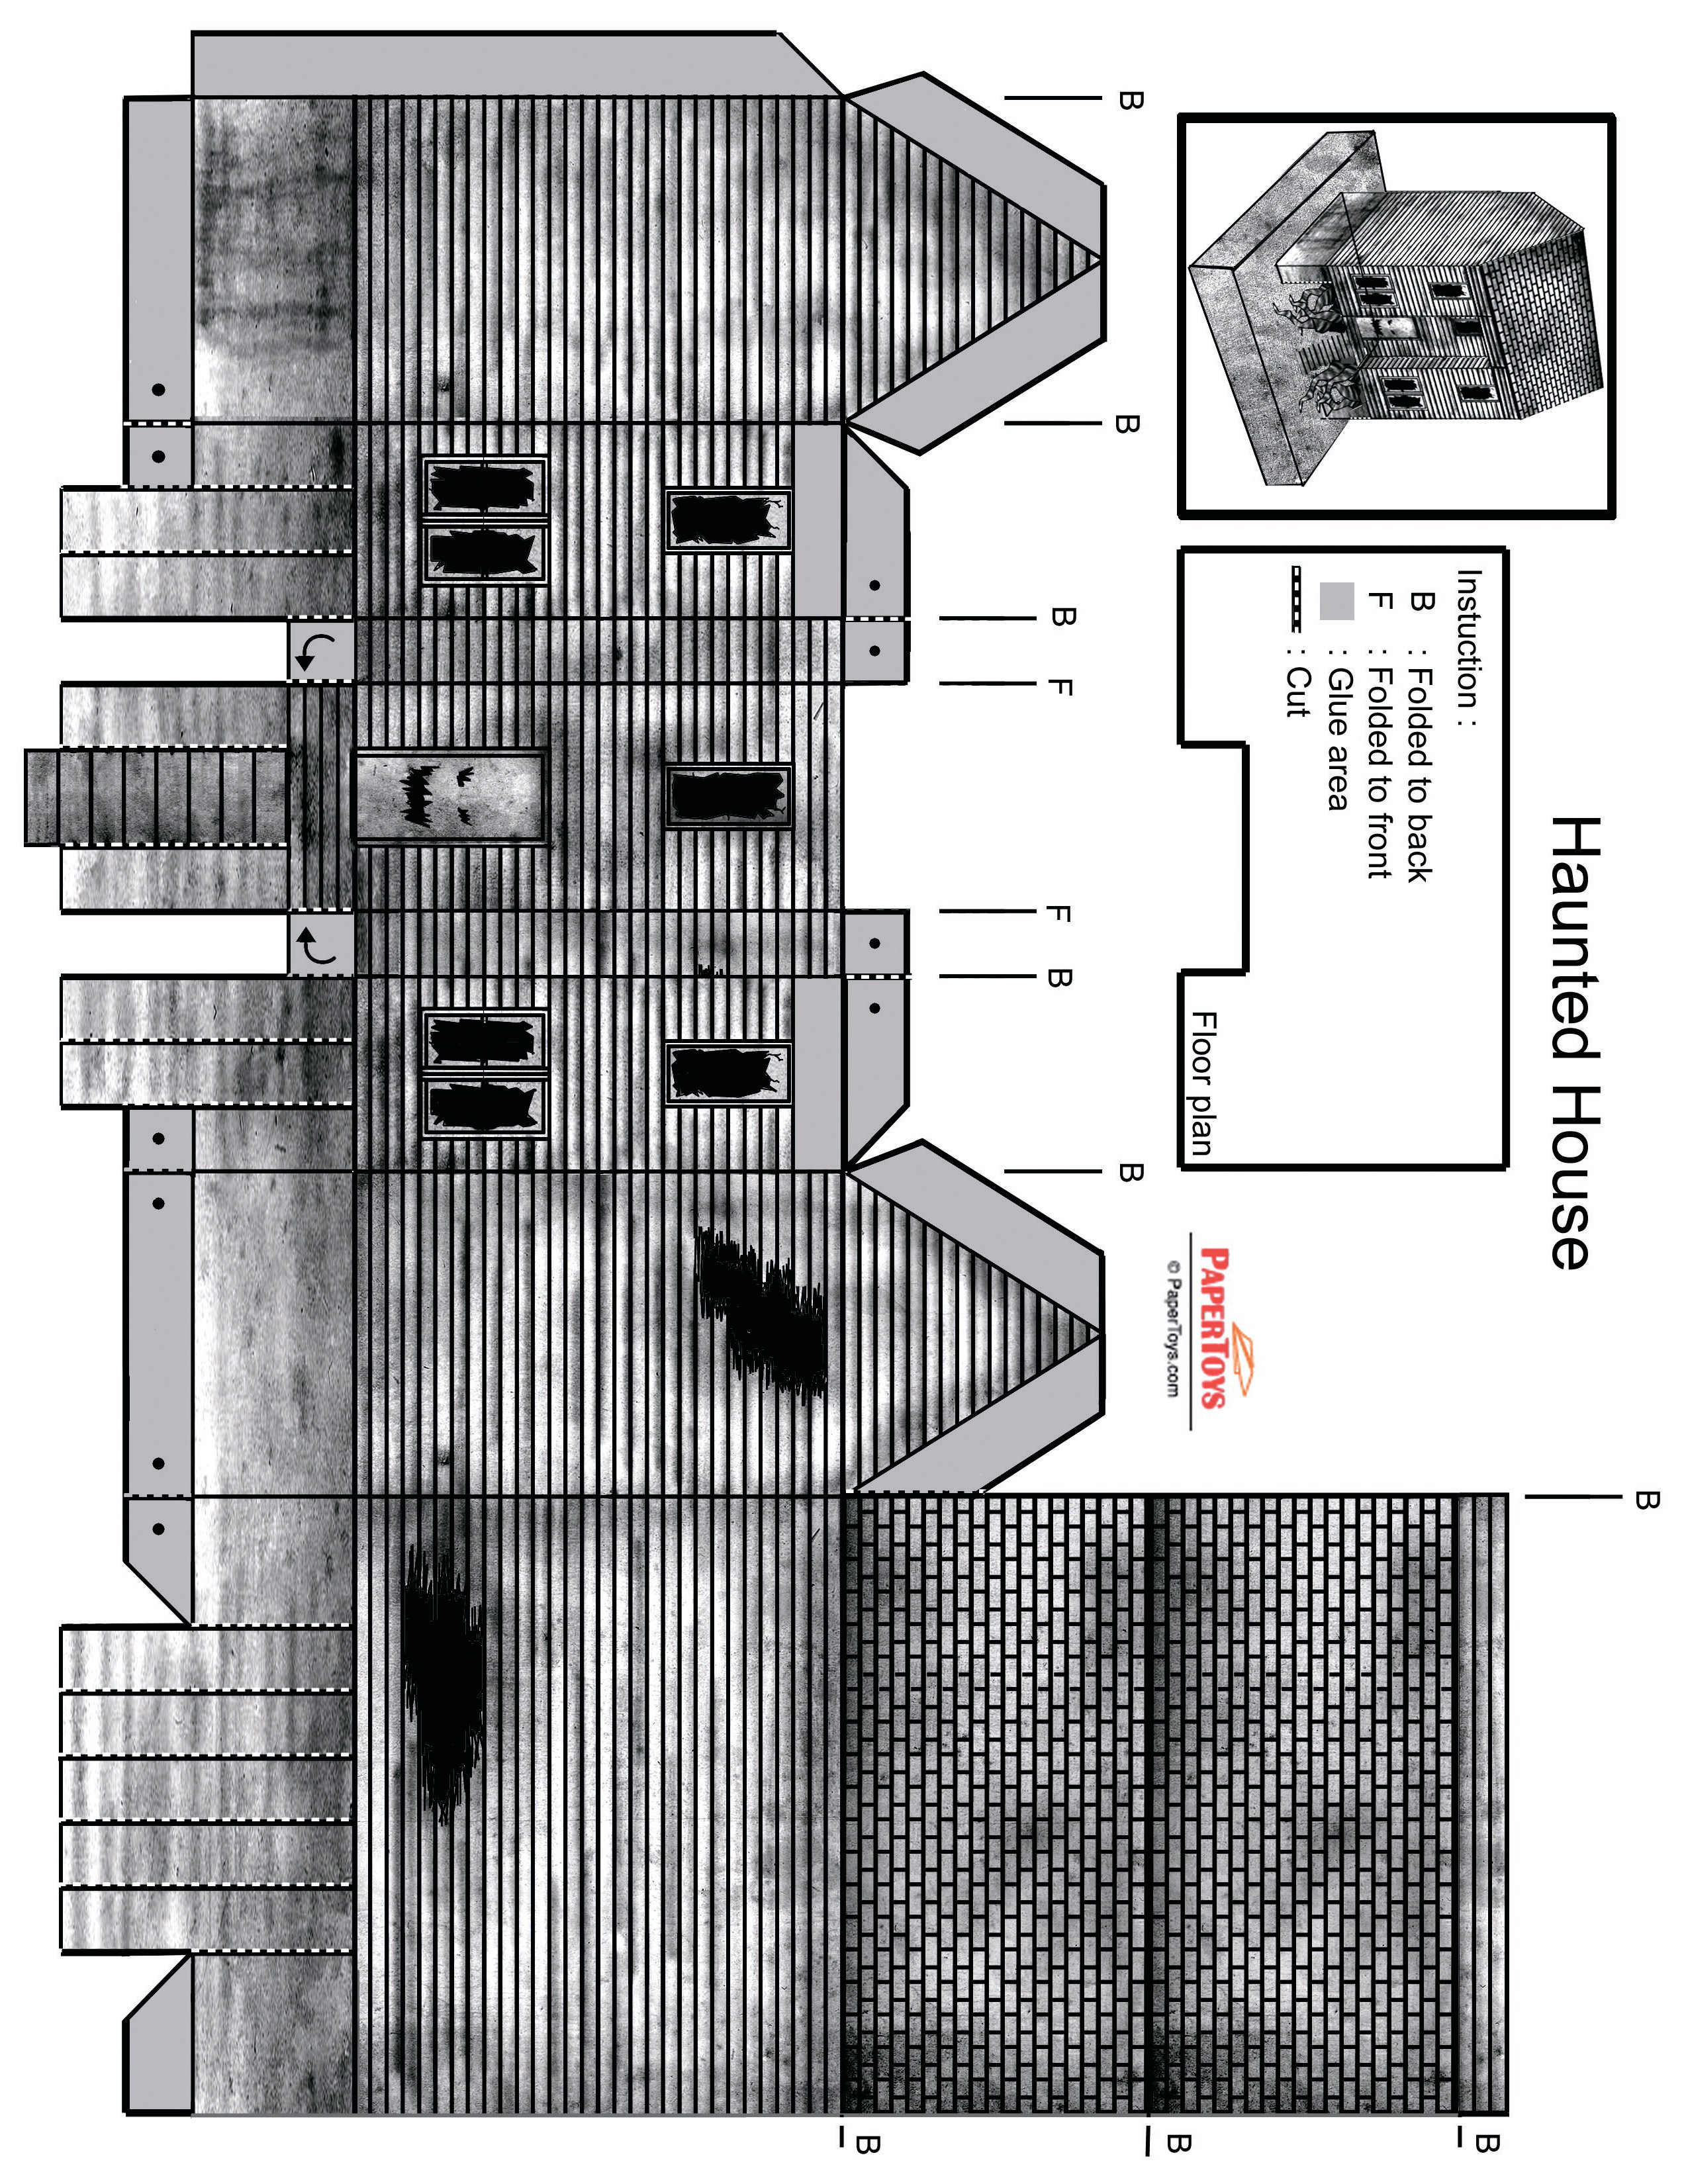 haunted-house-paper-model-free-printable-paper-template